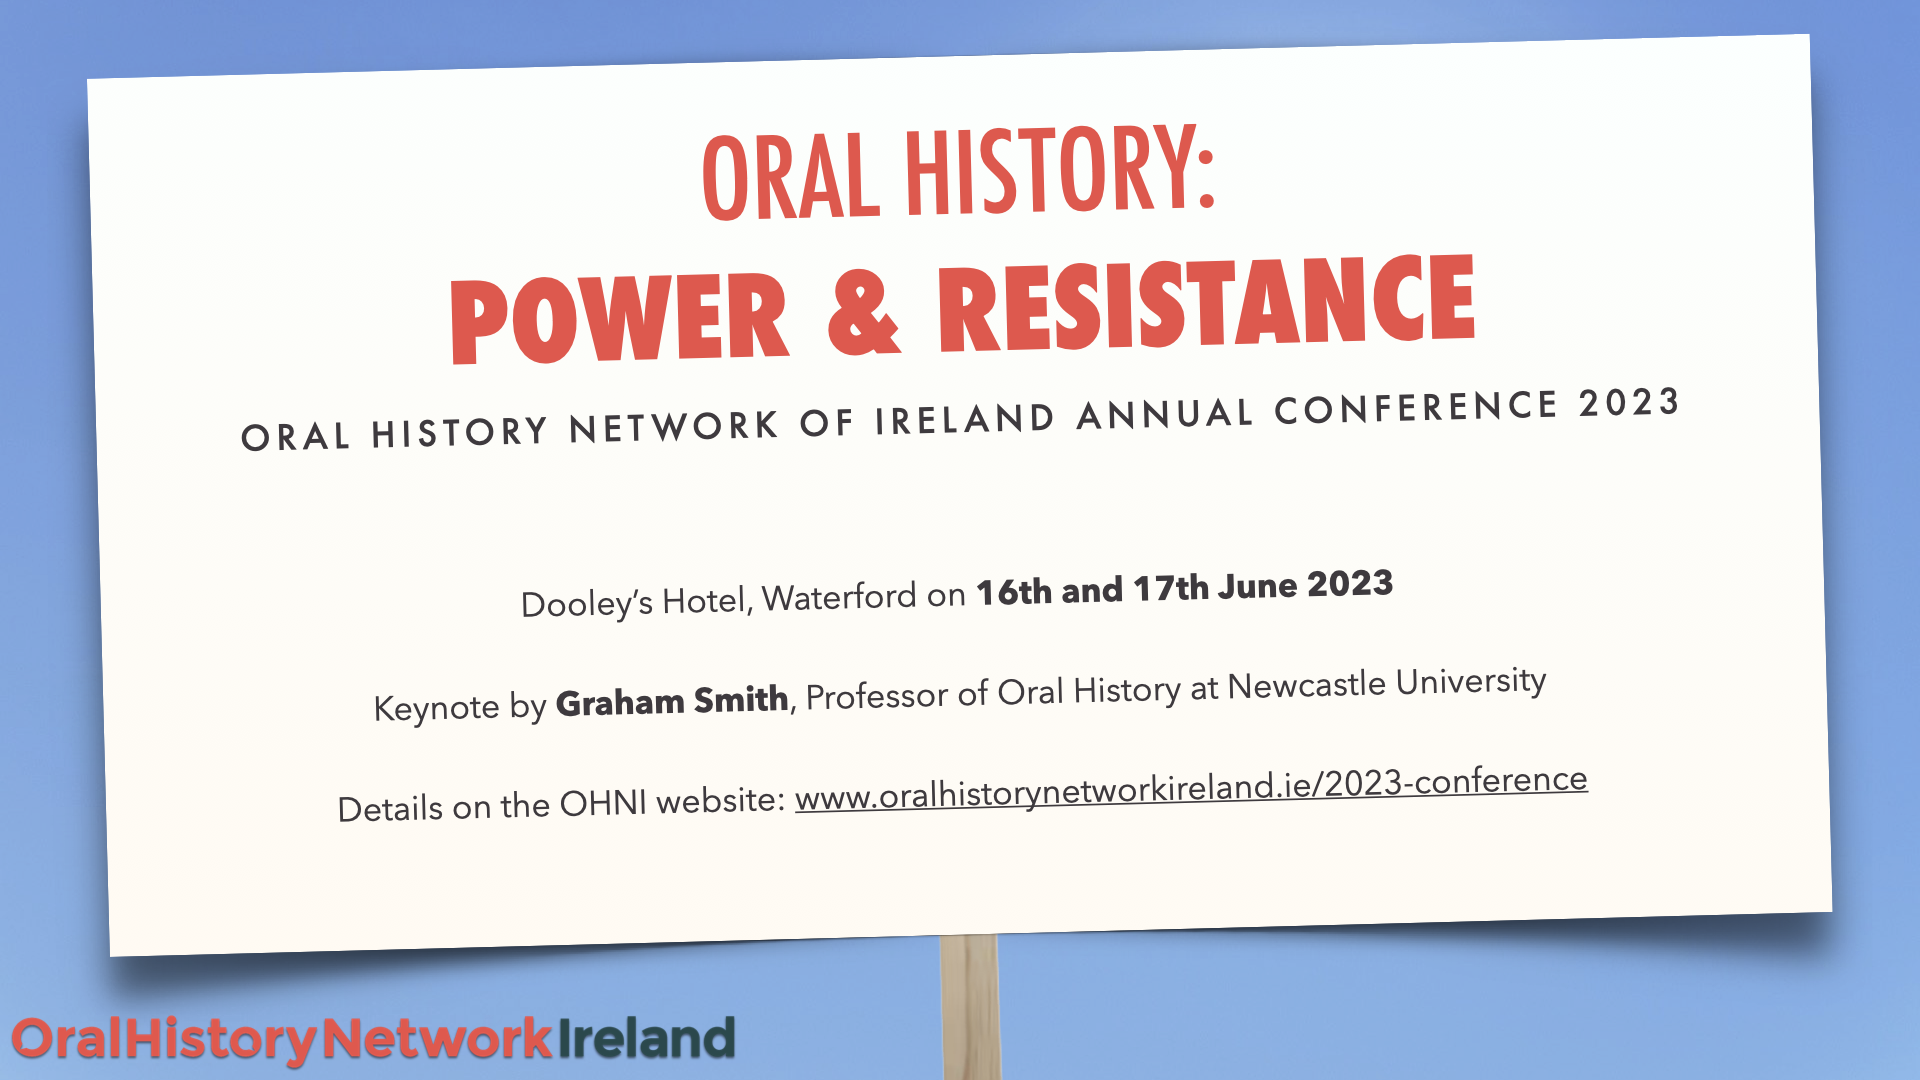 Oral History: Power & Resistance